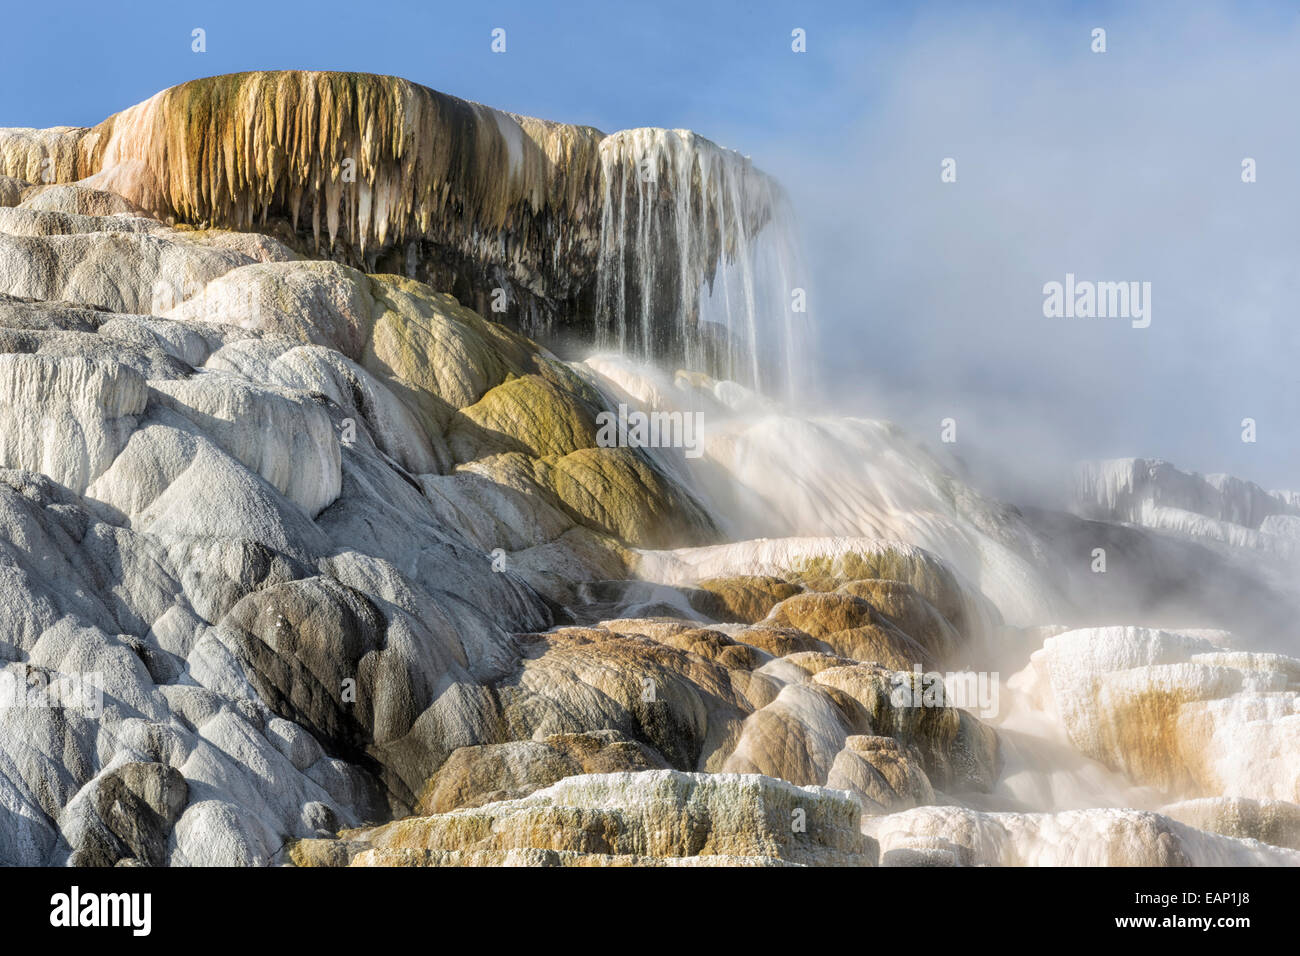 Palette Spring, Mammoth hot springs, Yellowstone national park Stock Photo